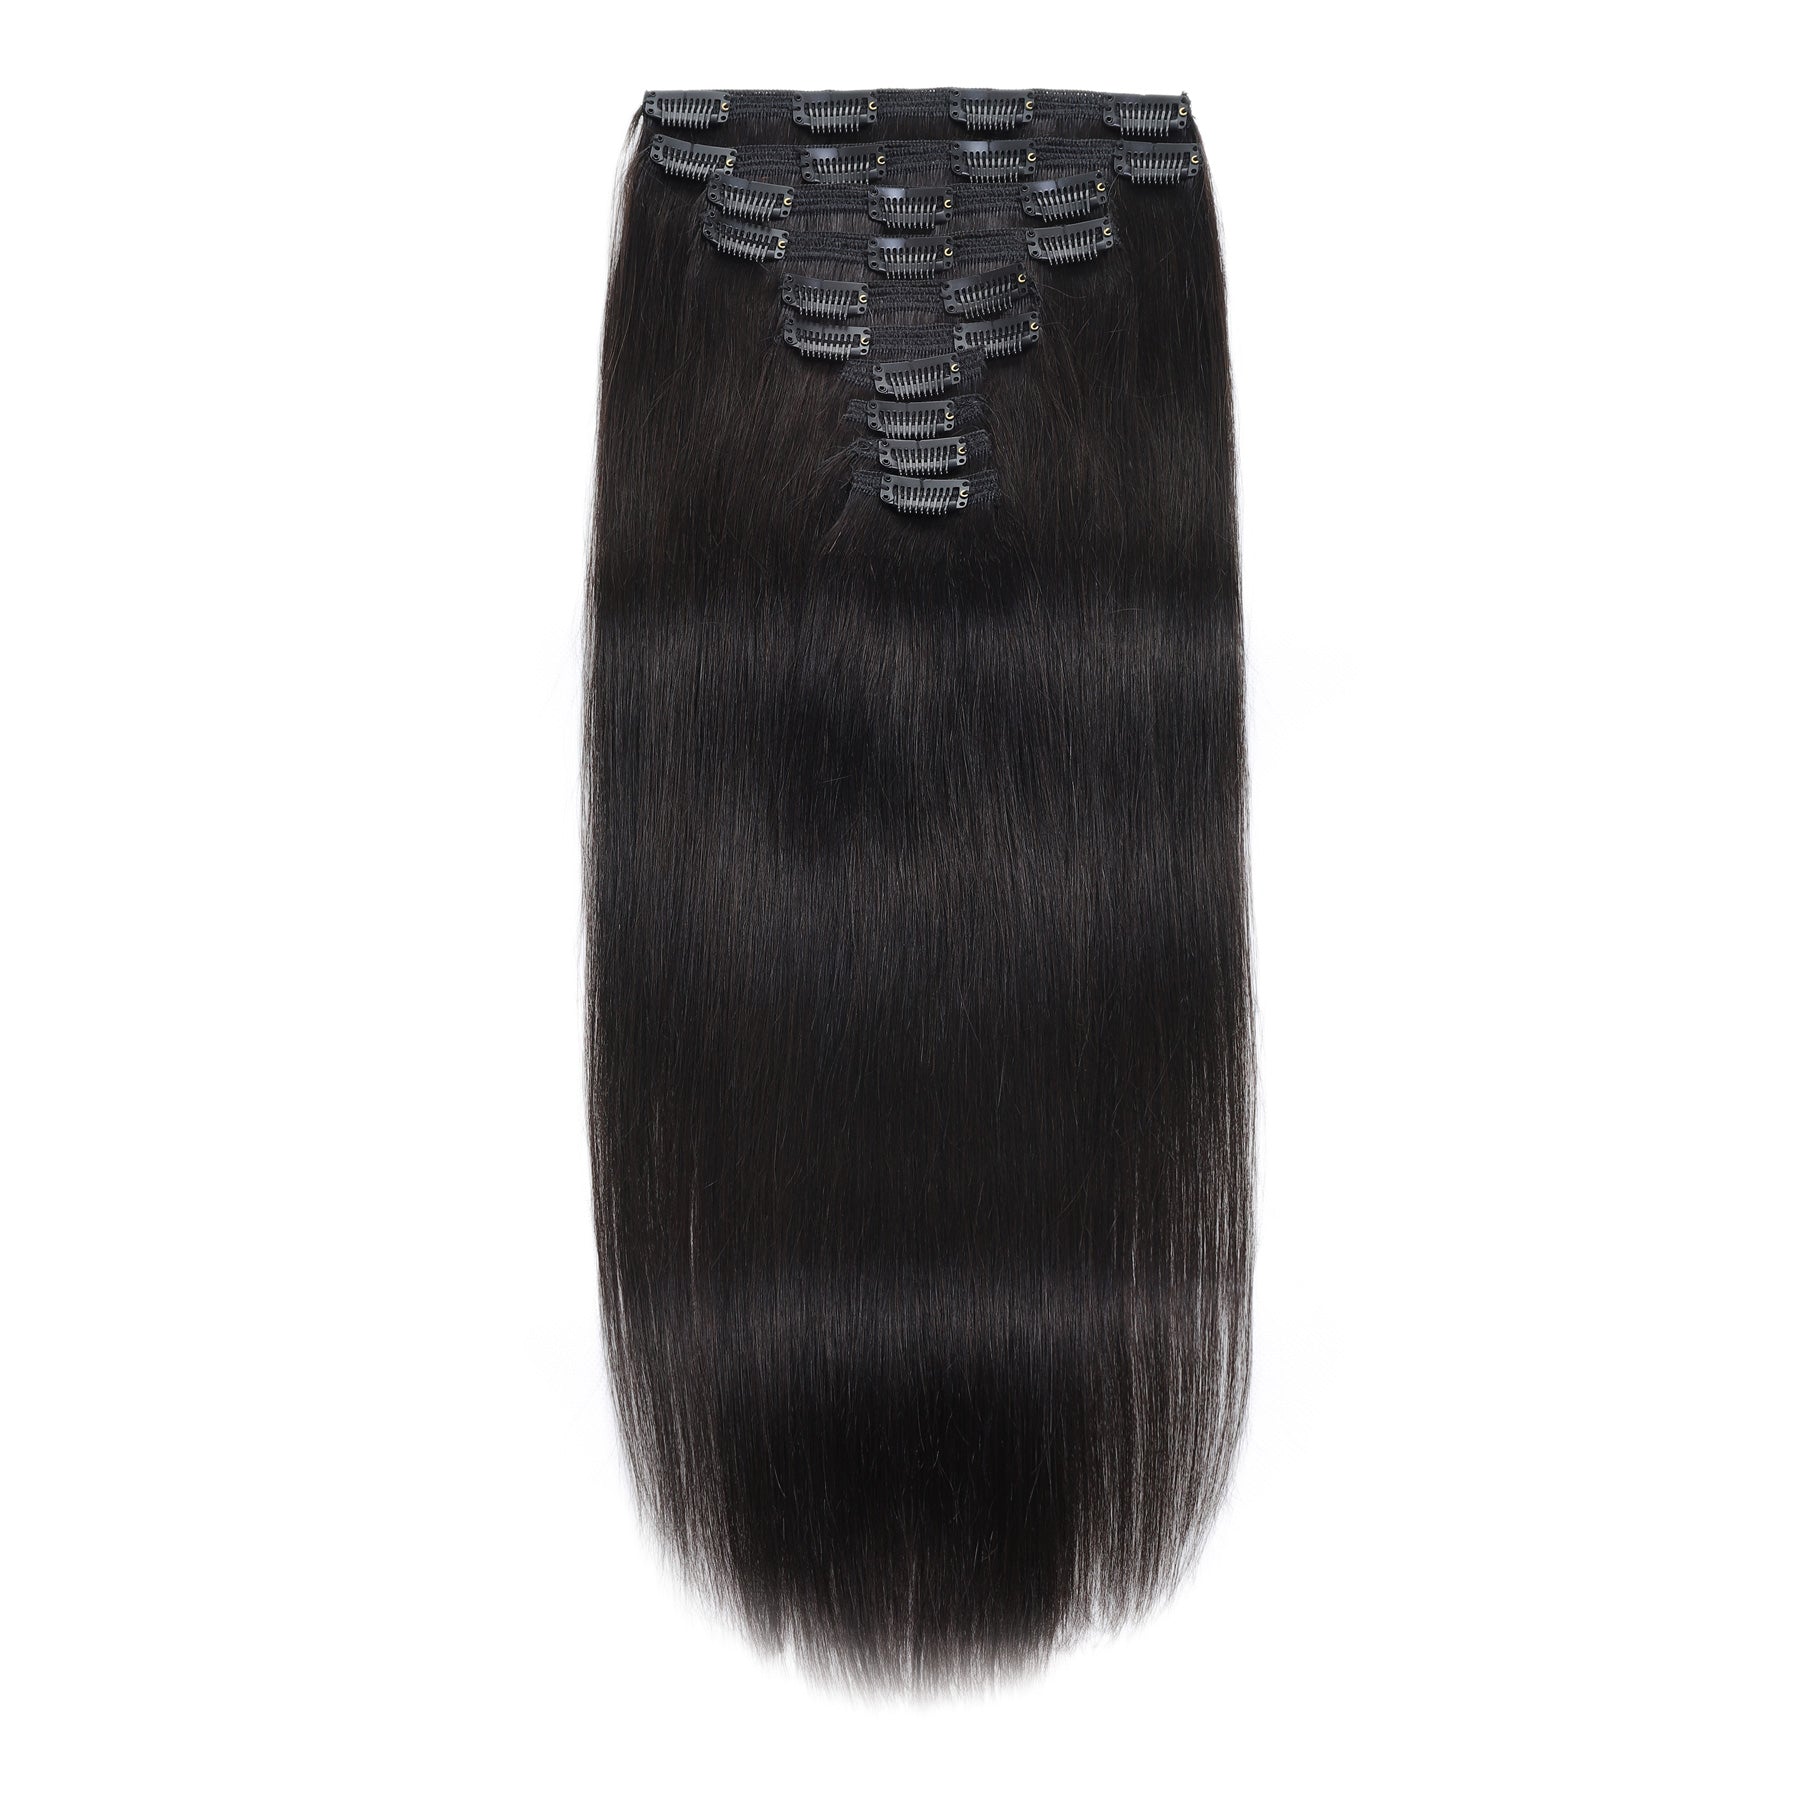 Achieve a full head of luscious hair with human hair extensions, providing extra thickness and volume. Ideal for creating a dramatic transformation with 26 inch extensions that look and feel natural.